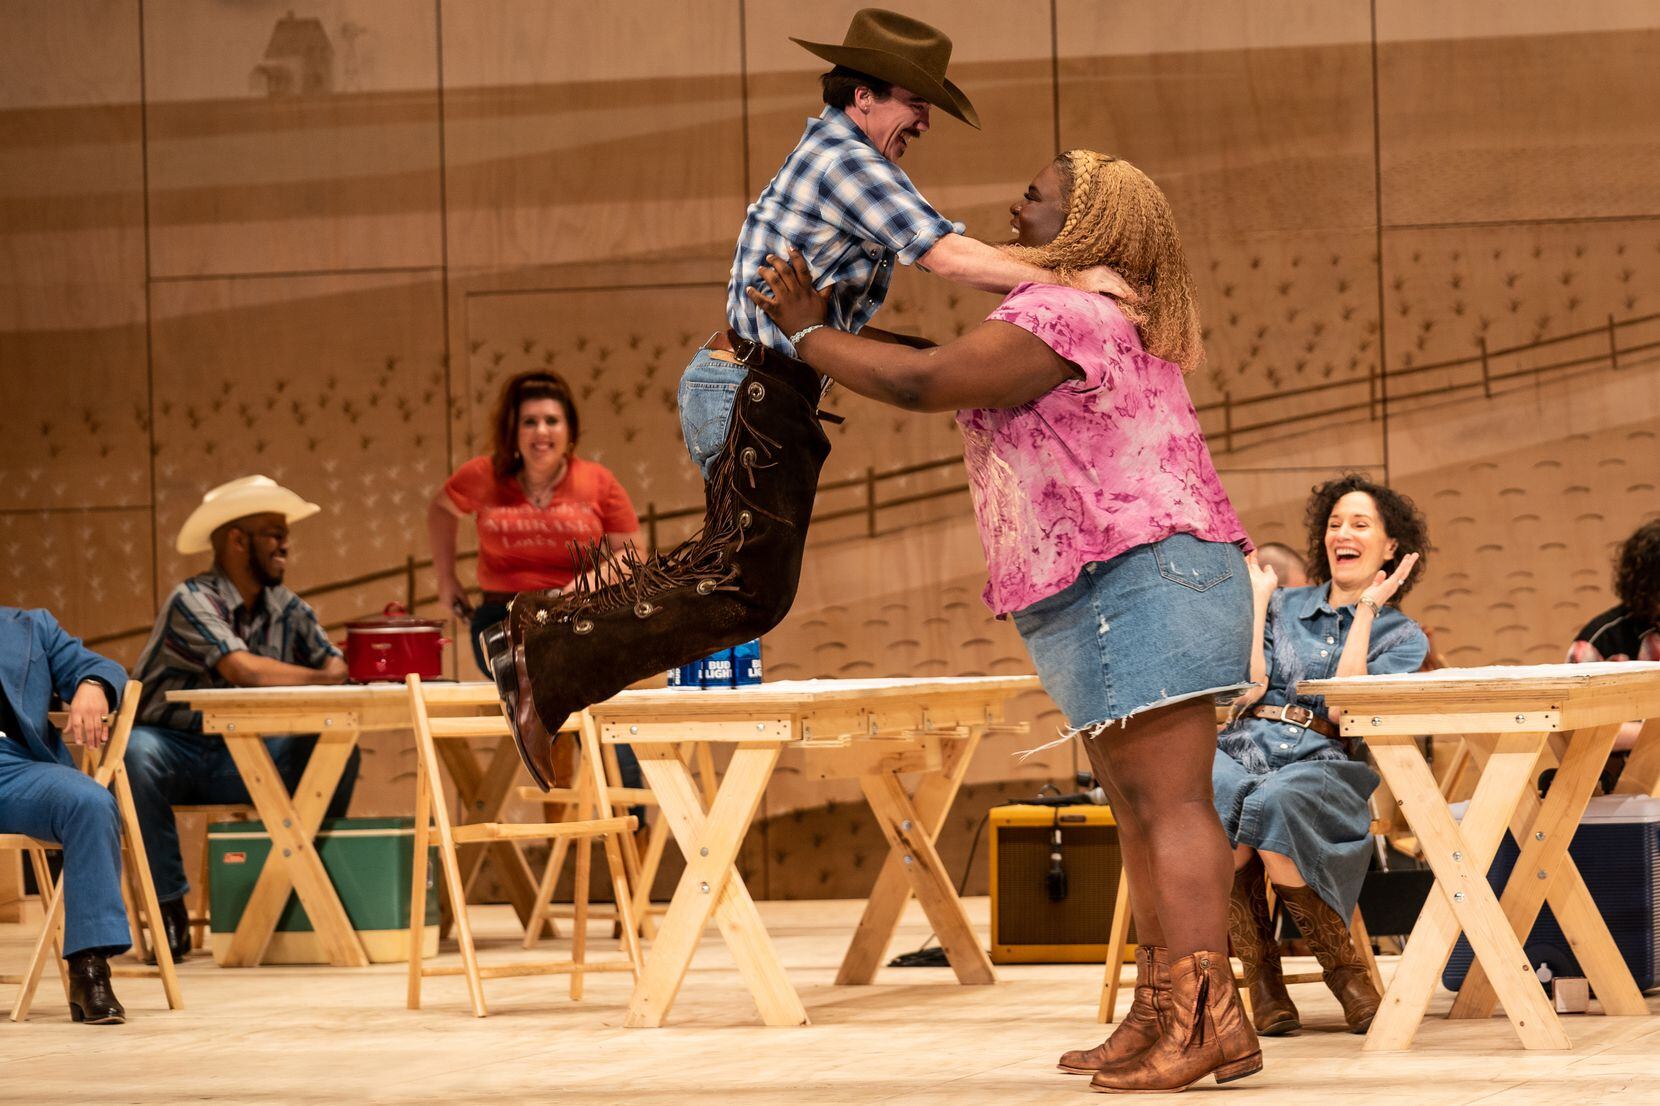 Hennessy Winkler, Sis and the company of the national tour of "Oklahoma!"